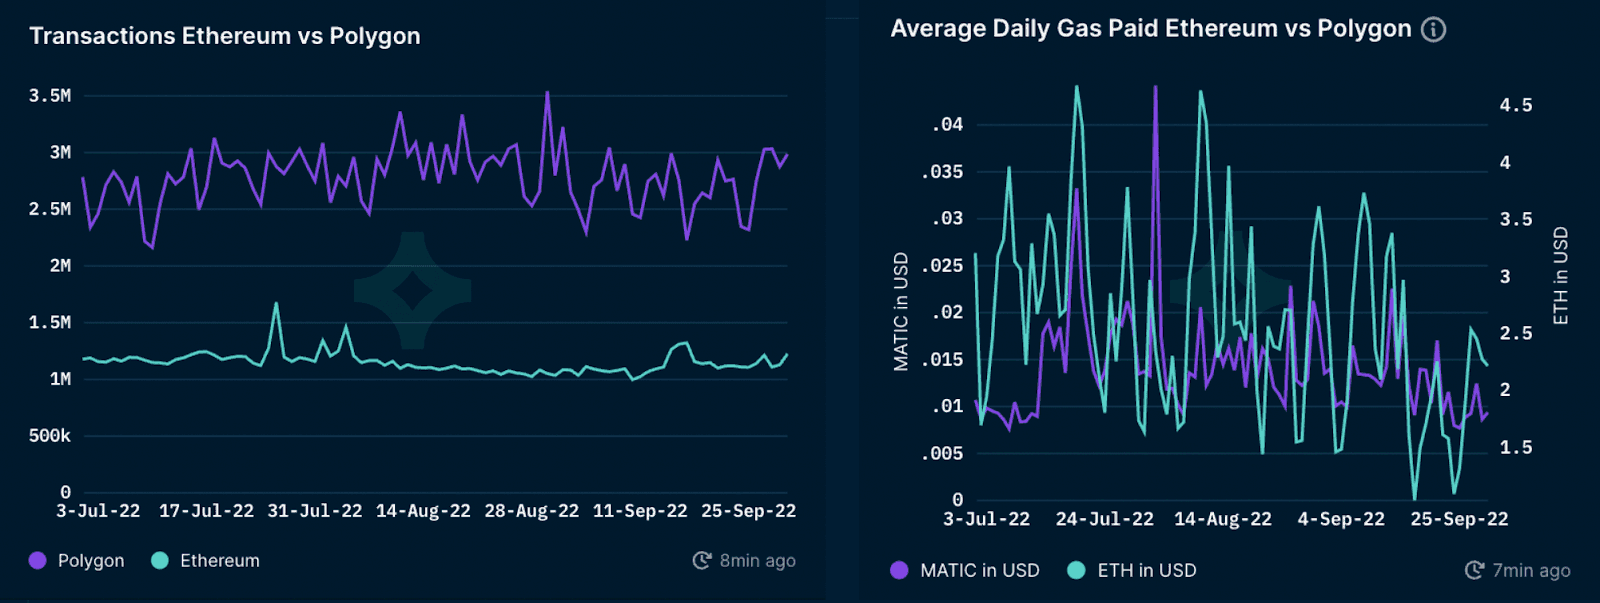 Daily Transactions and Gas Paid on Polygon (vs Ethereum)